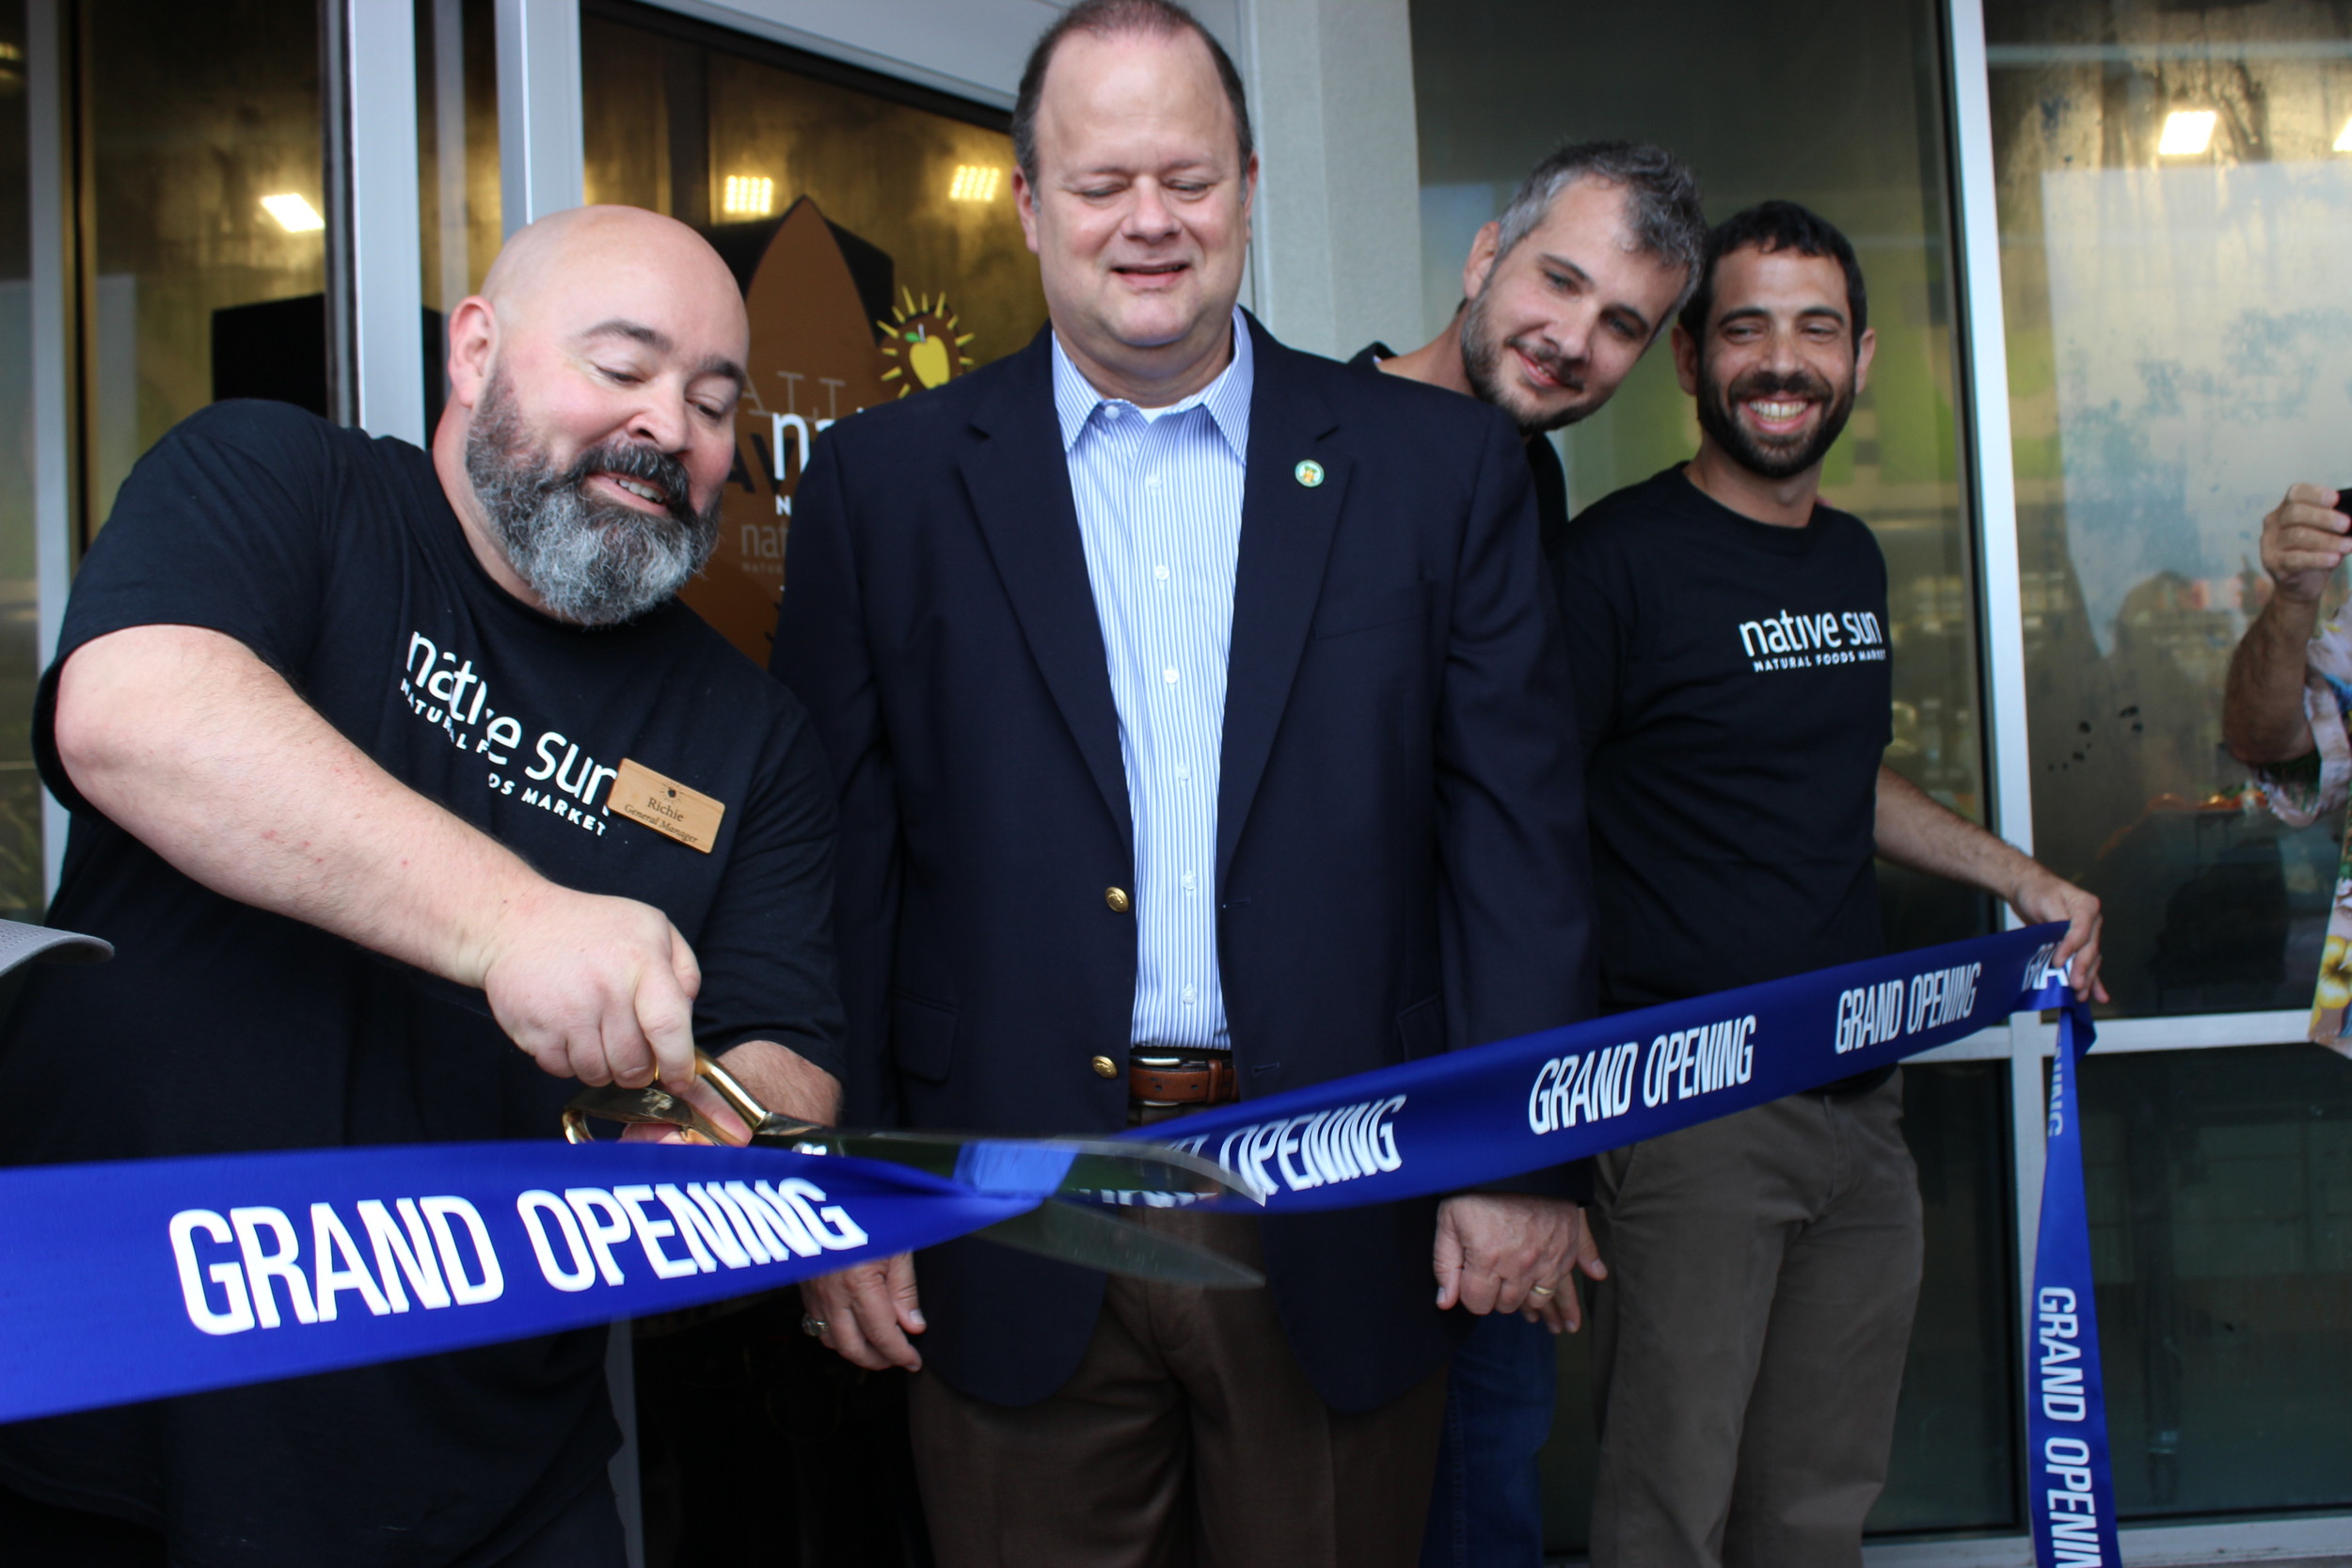 Native Sun Jacksonville Beach General Manager Richie Whitson cuts the ribbon at the grand opening of the new store while Jacksonville Beach Mayor Charlie Latham and Native Sun founder, Aaron Gottlieb (far right) look on.